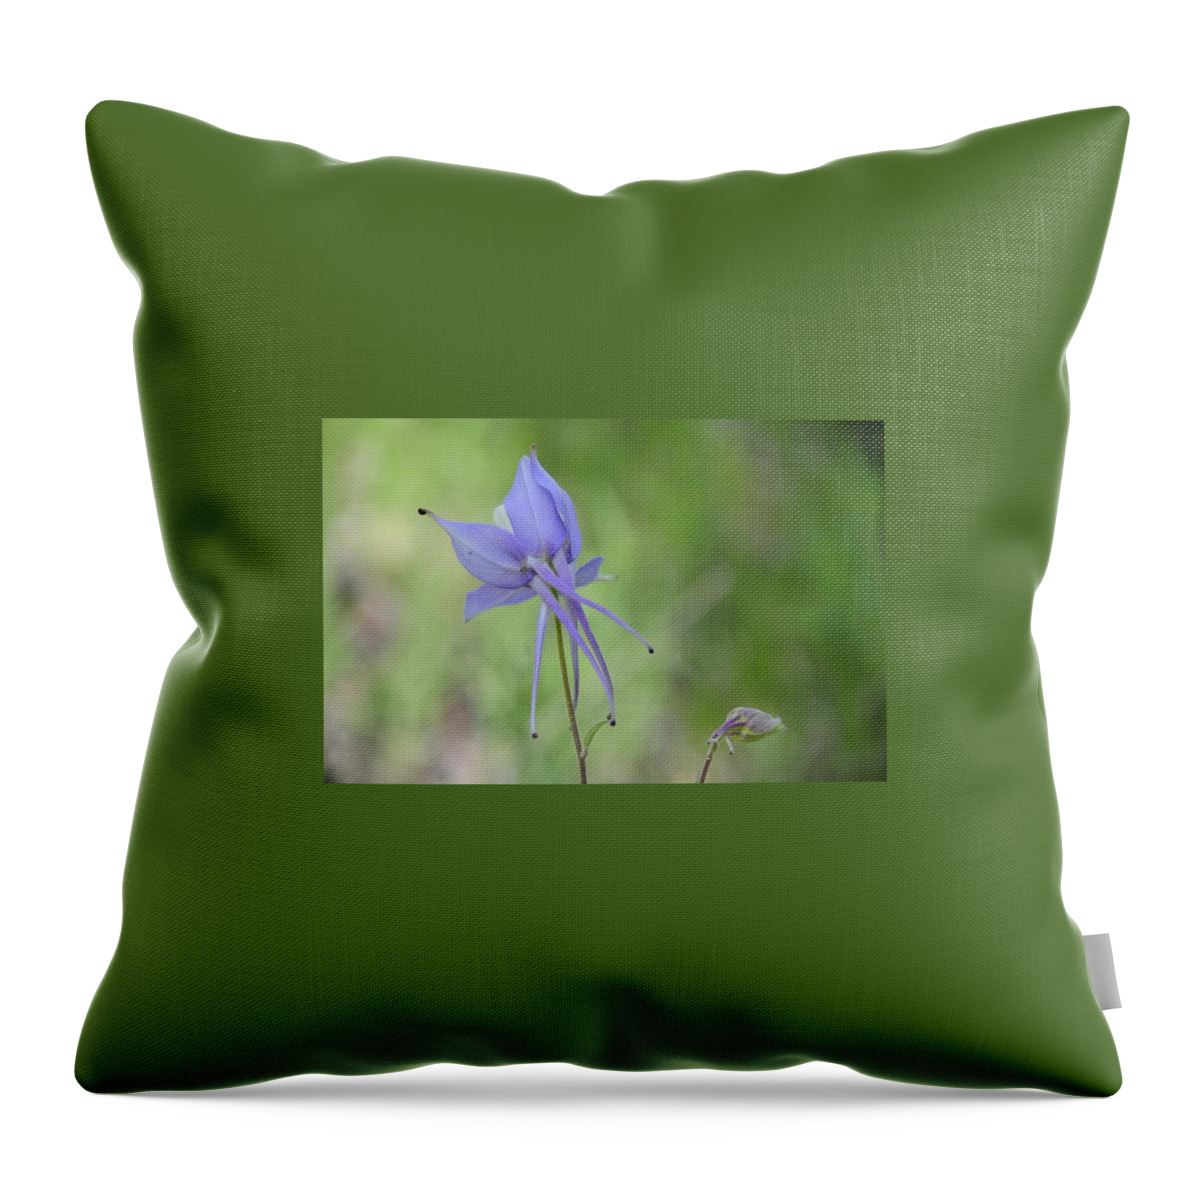  Throw Pillow featuring the photograph Columbine details by Susie Rieple